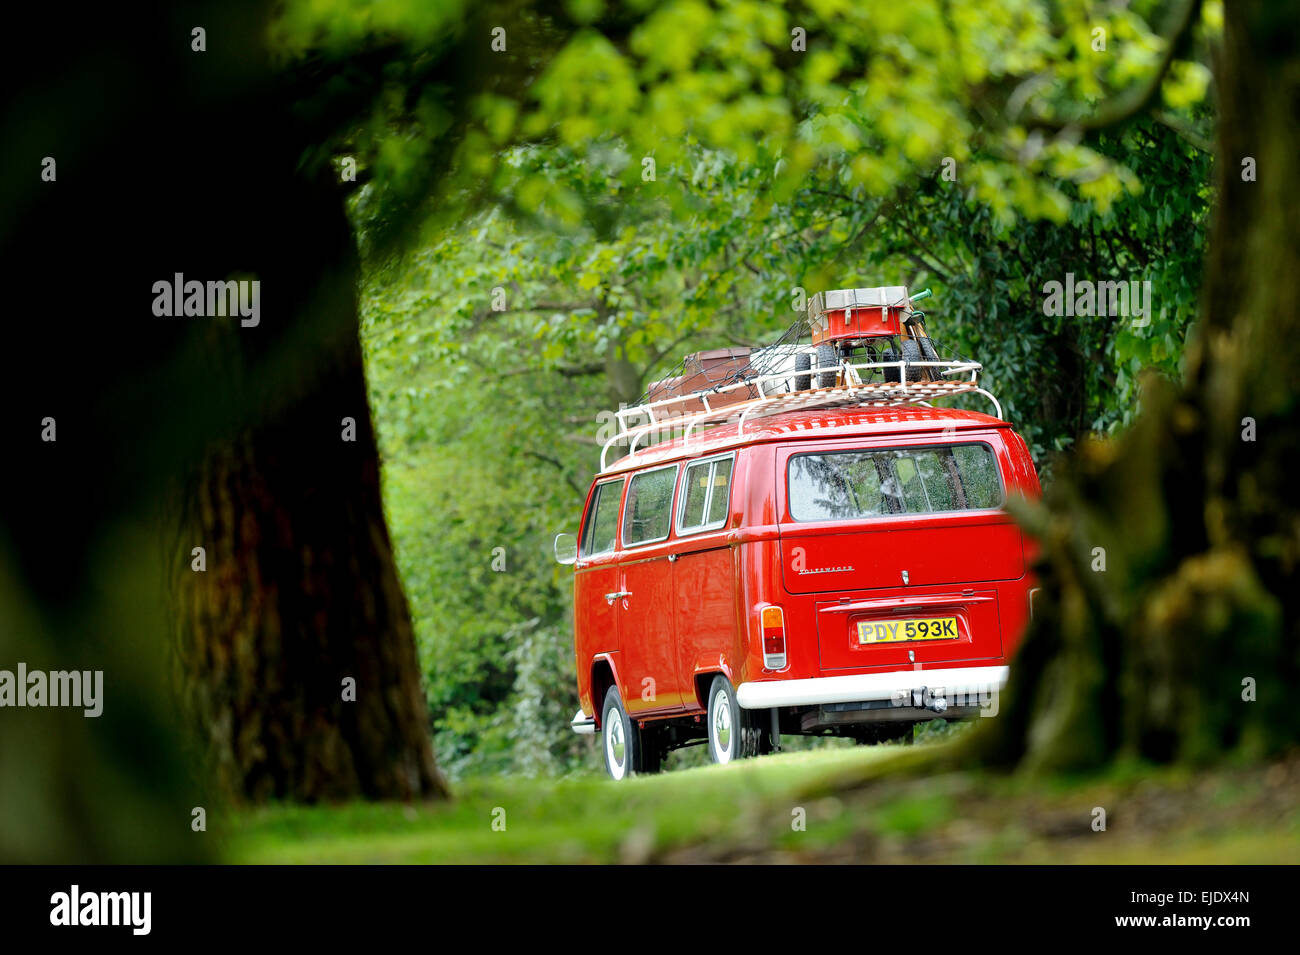 Rear view of a bright red UK-registered Volkswagen campervan driving on a country road through a forest. Stock Photo